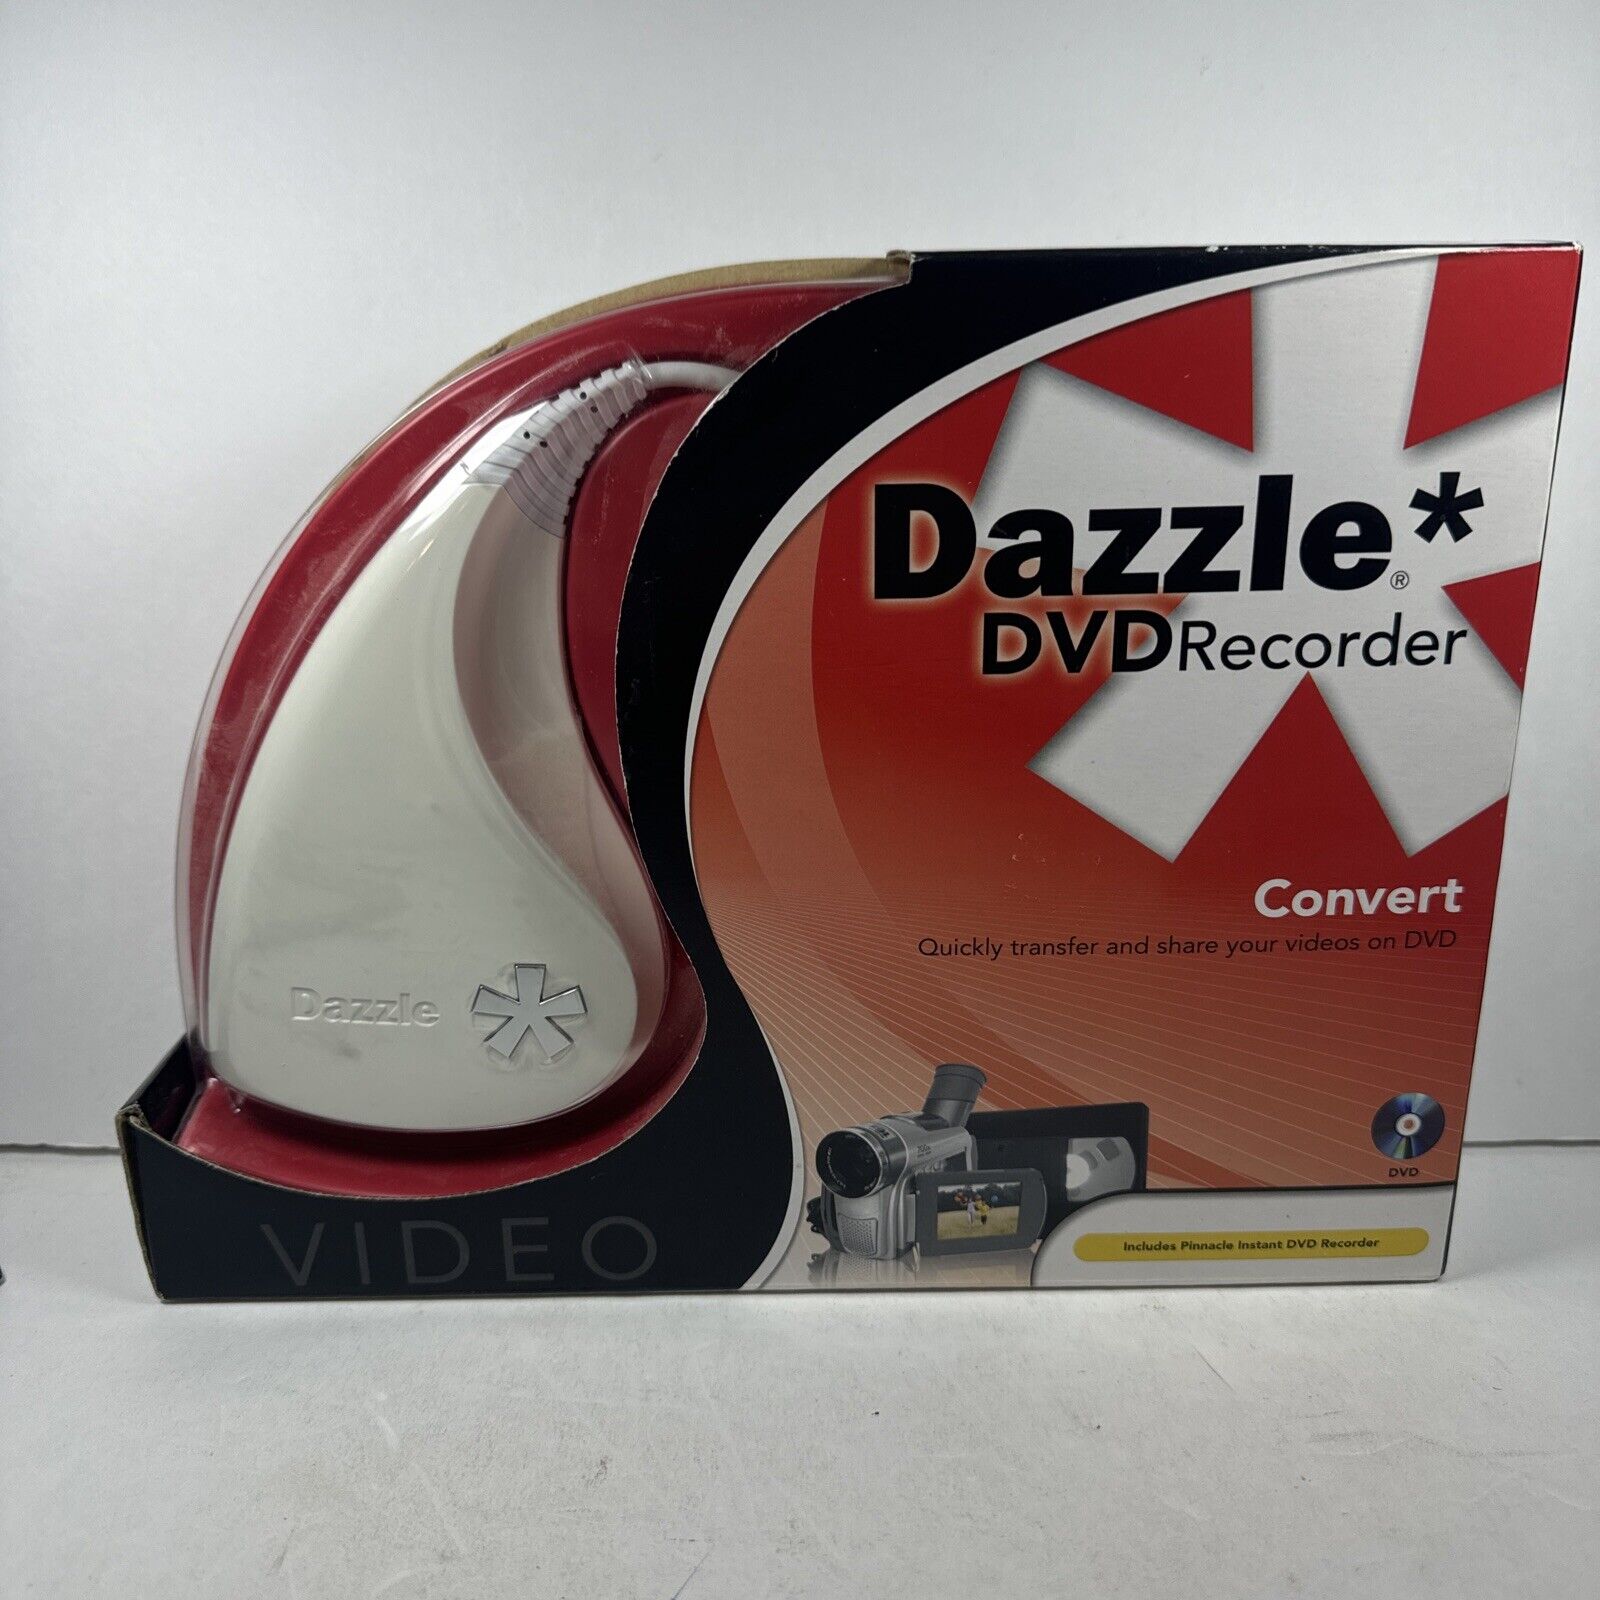 Dazzle USB Convert Save Enhance Share Capture Video - with Instant DVD Recorder